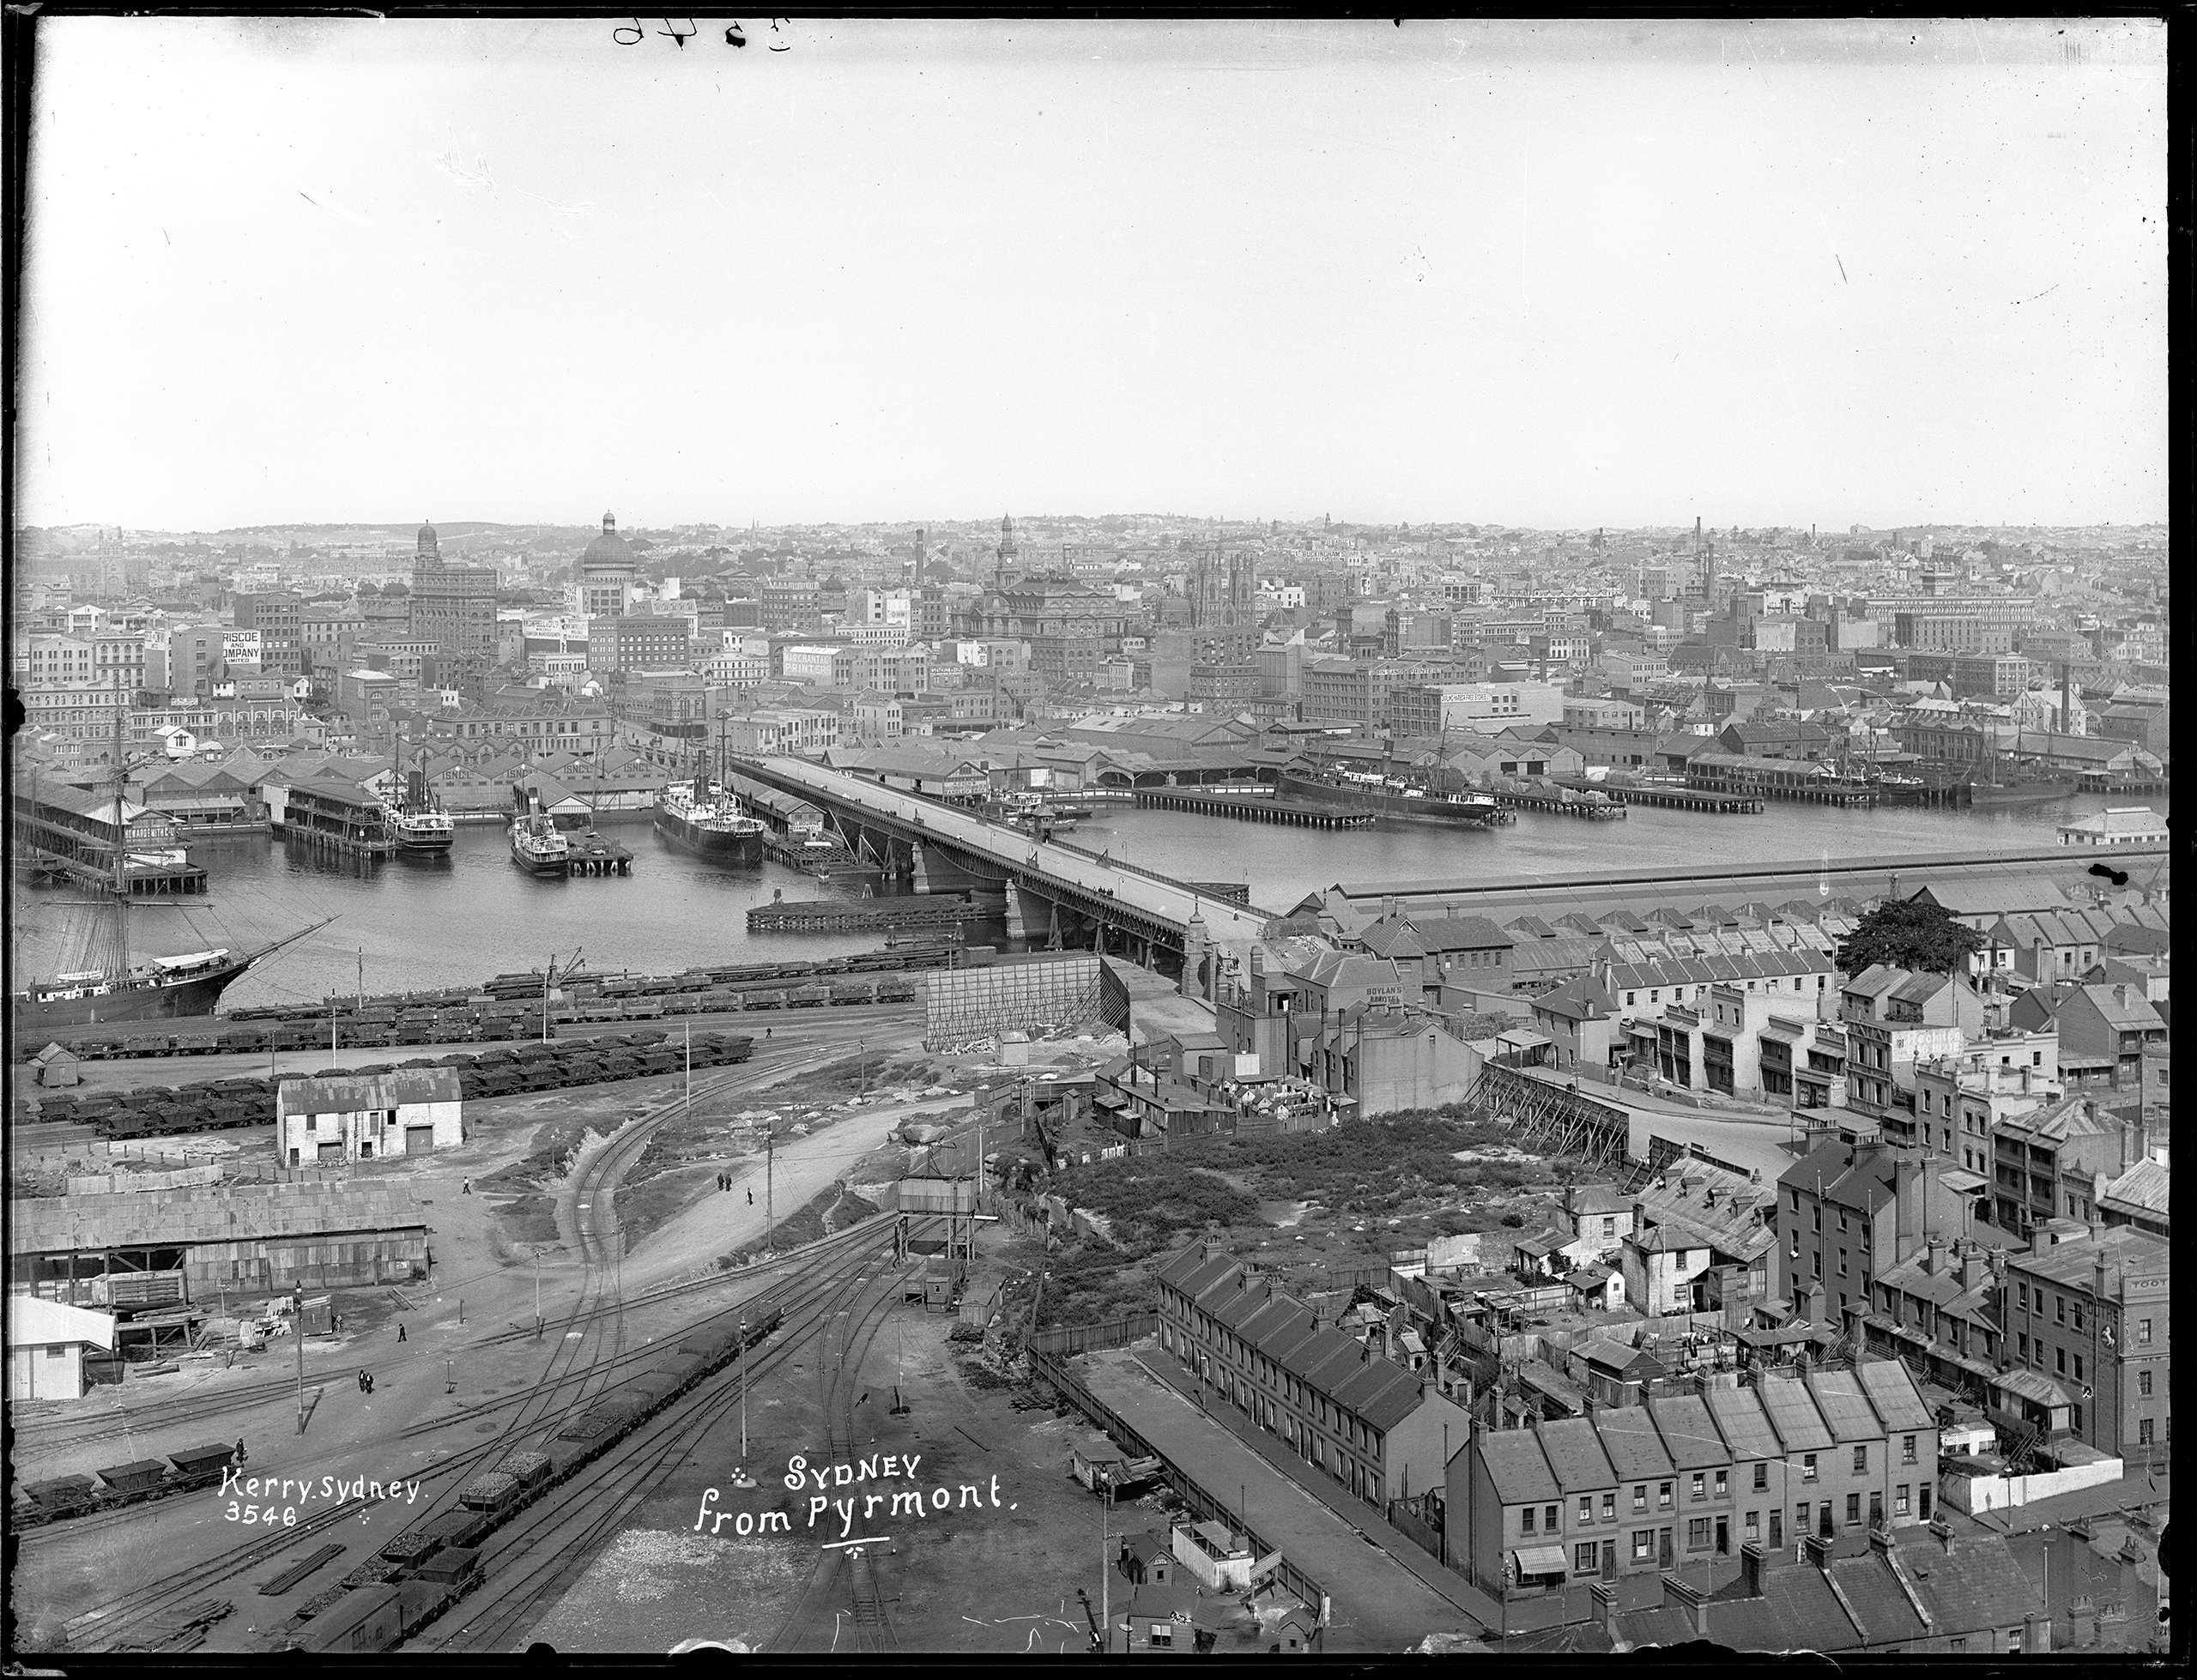 Glass plate negative of Sydney from Pyrmont showing the Darling Harbour goods yard and Pyrmont Bridge, 1902-1910